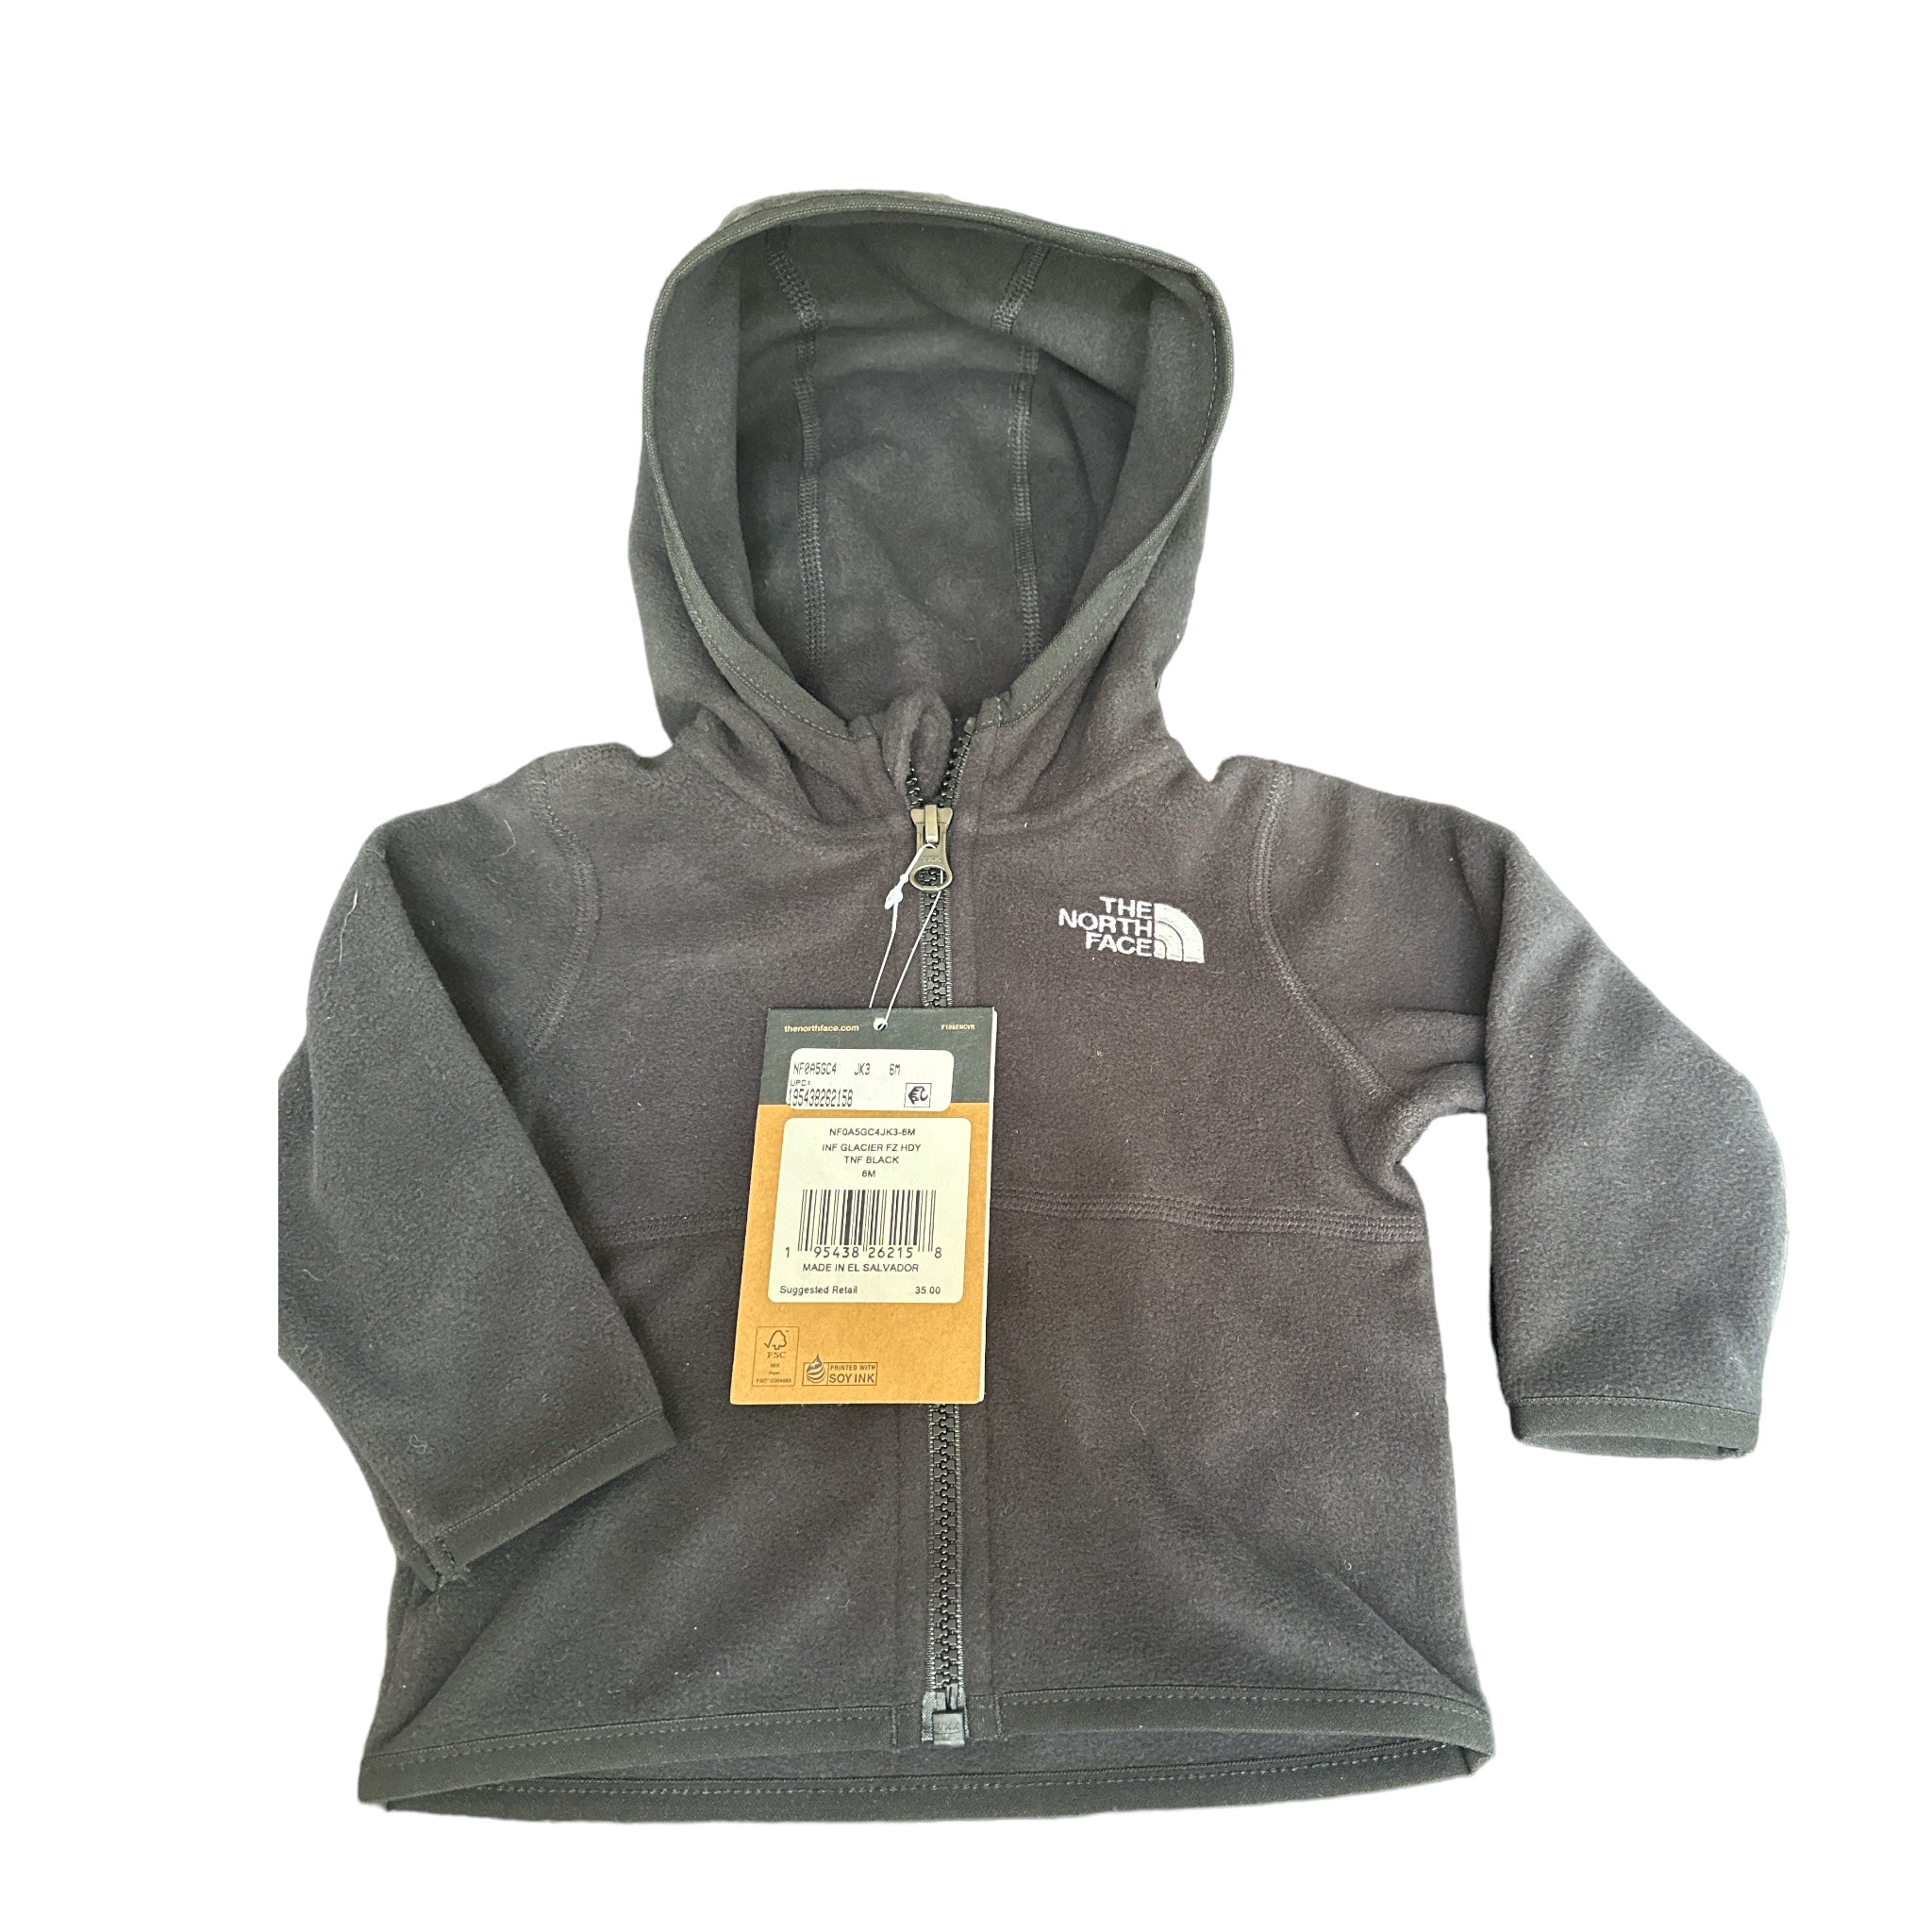 Jacket North Face Size 6M NWT